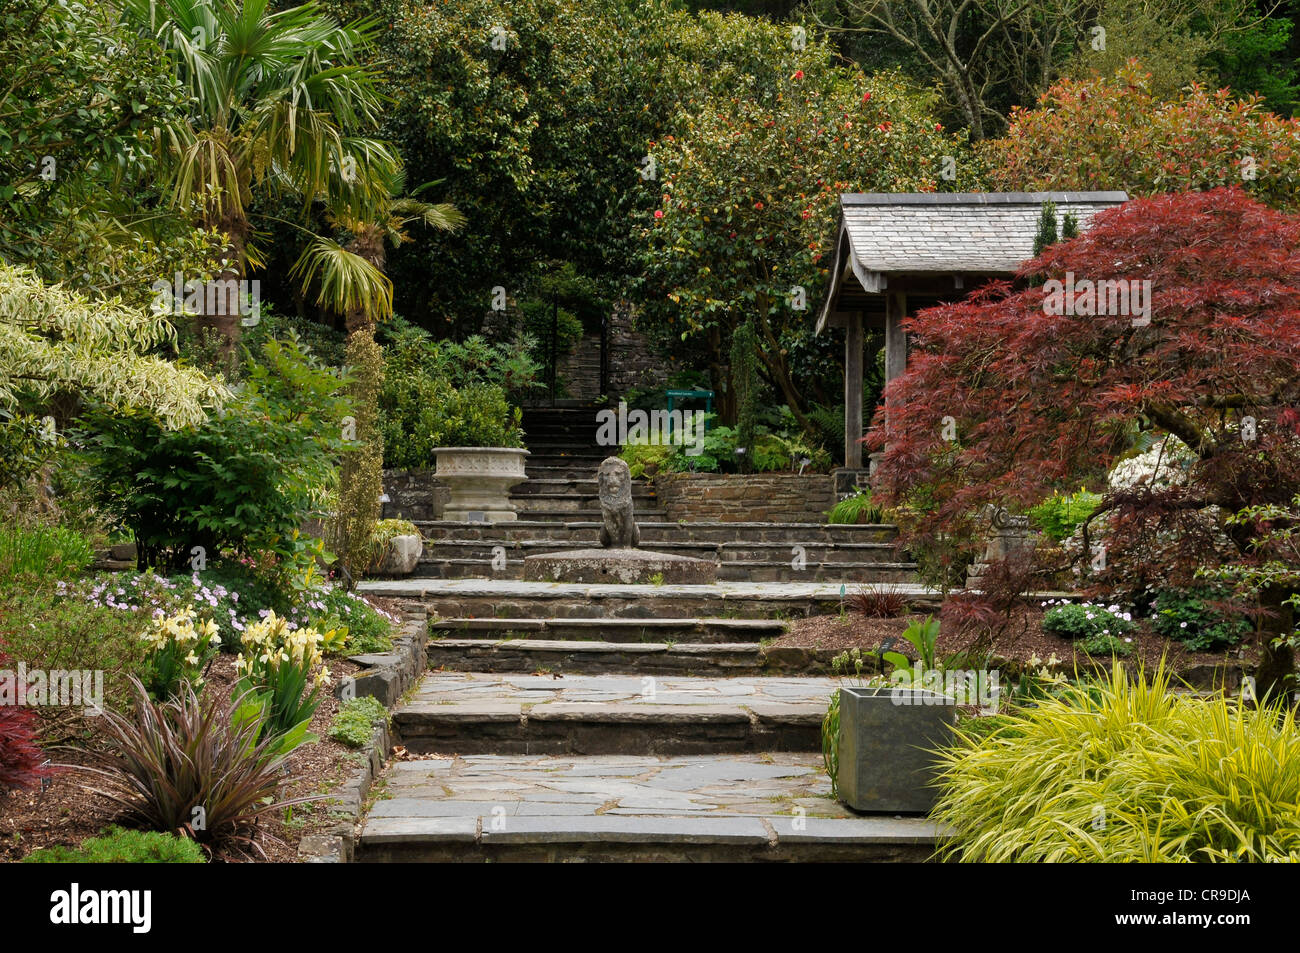 A landscape image of crazy paved steps lined with exotic plants and trees leading to statue and shelter in Rosemoor Gardens. Stock Photo